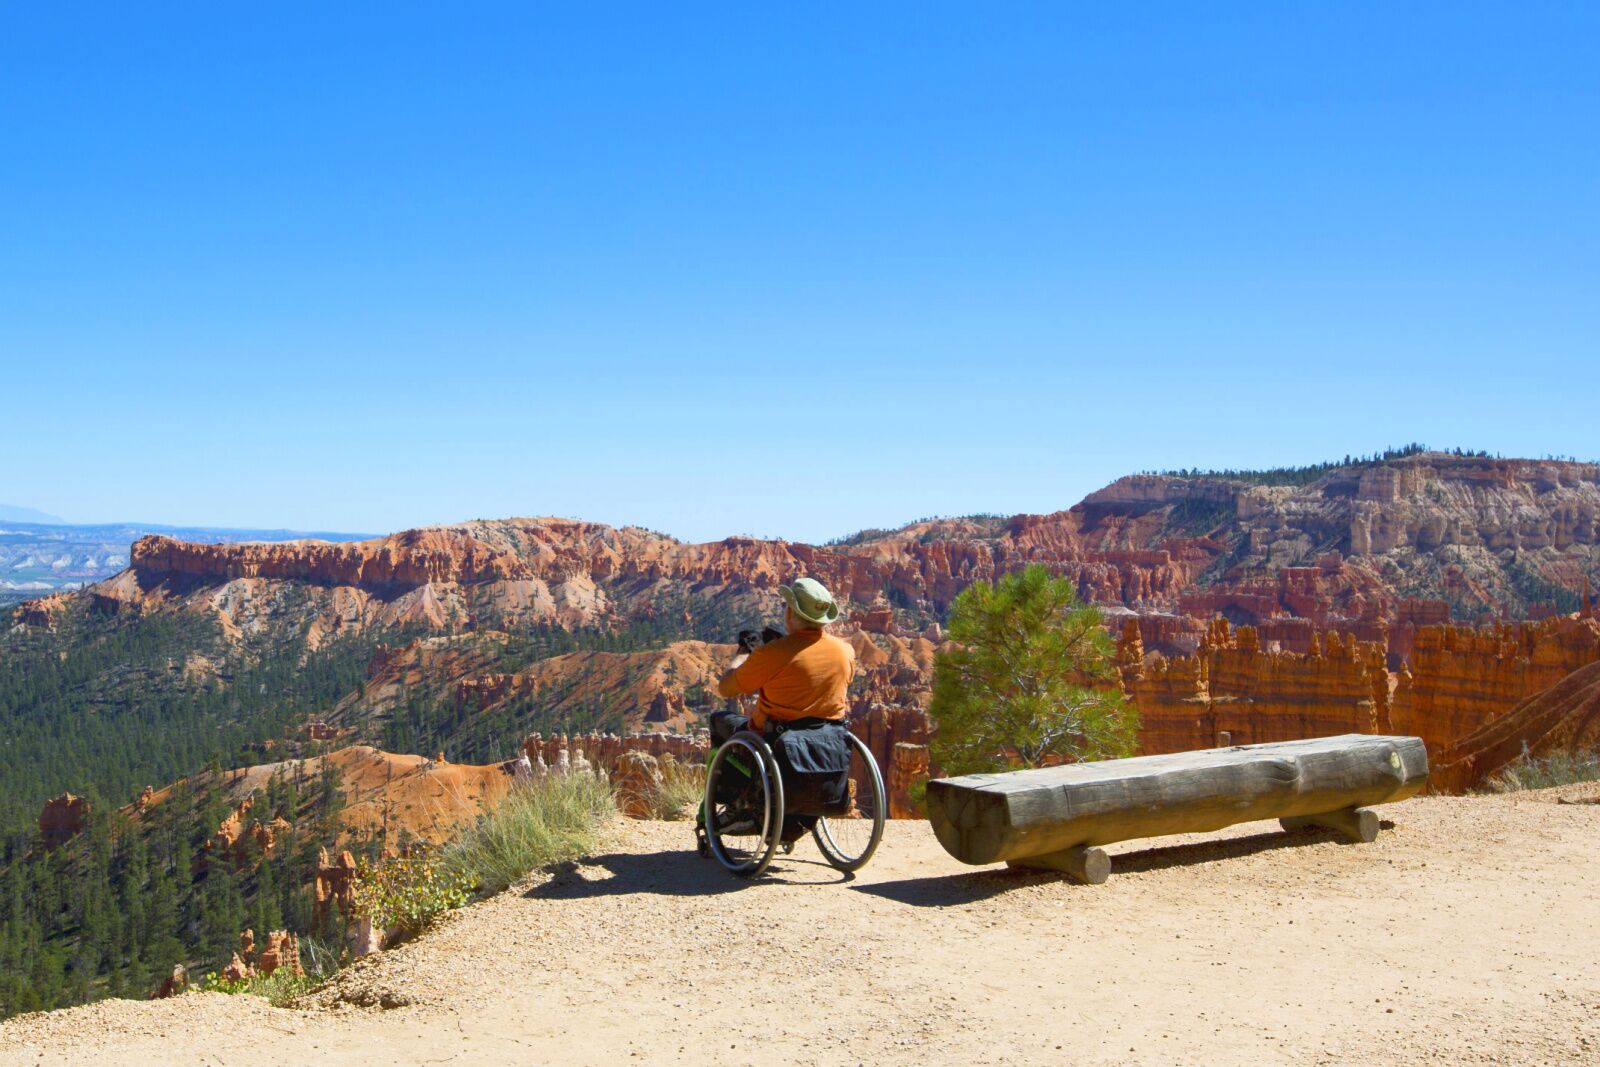 bryce canyon vs zion - wheelchair user at overlook